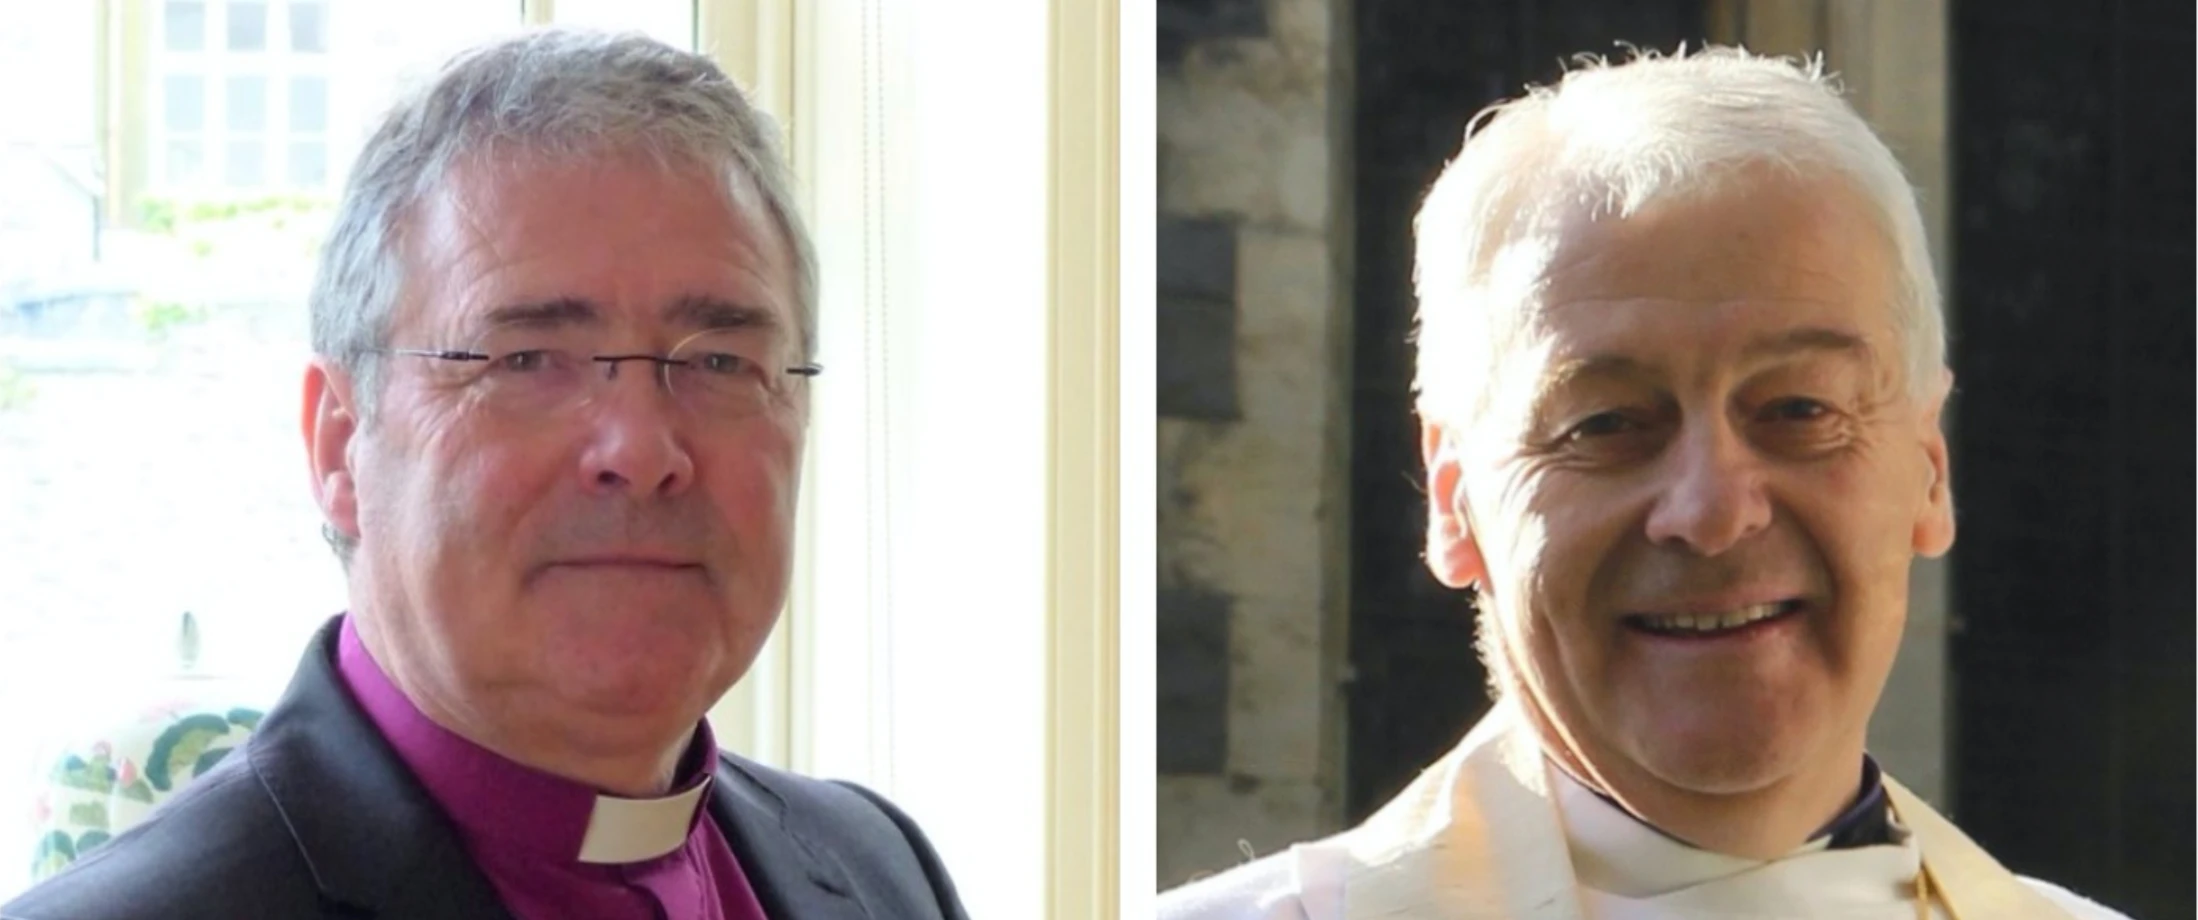 Joint Statement from the Archbishop of Armagh and the Archbishop of Dublin